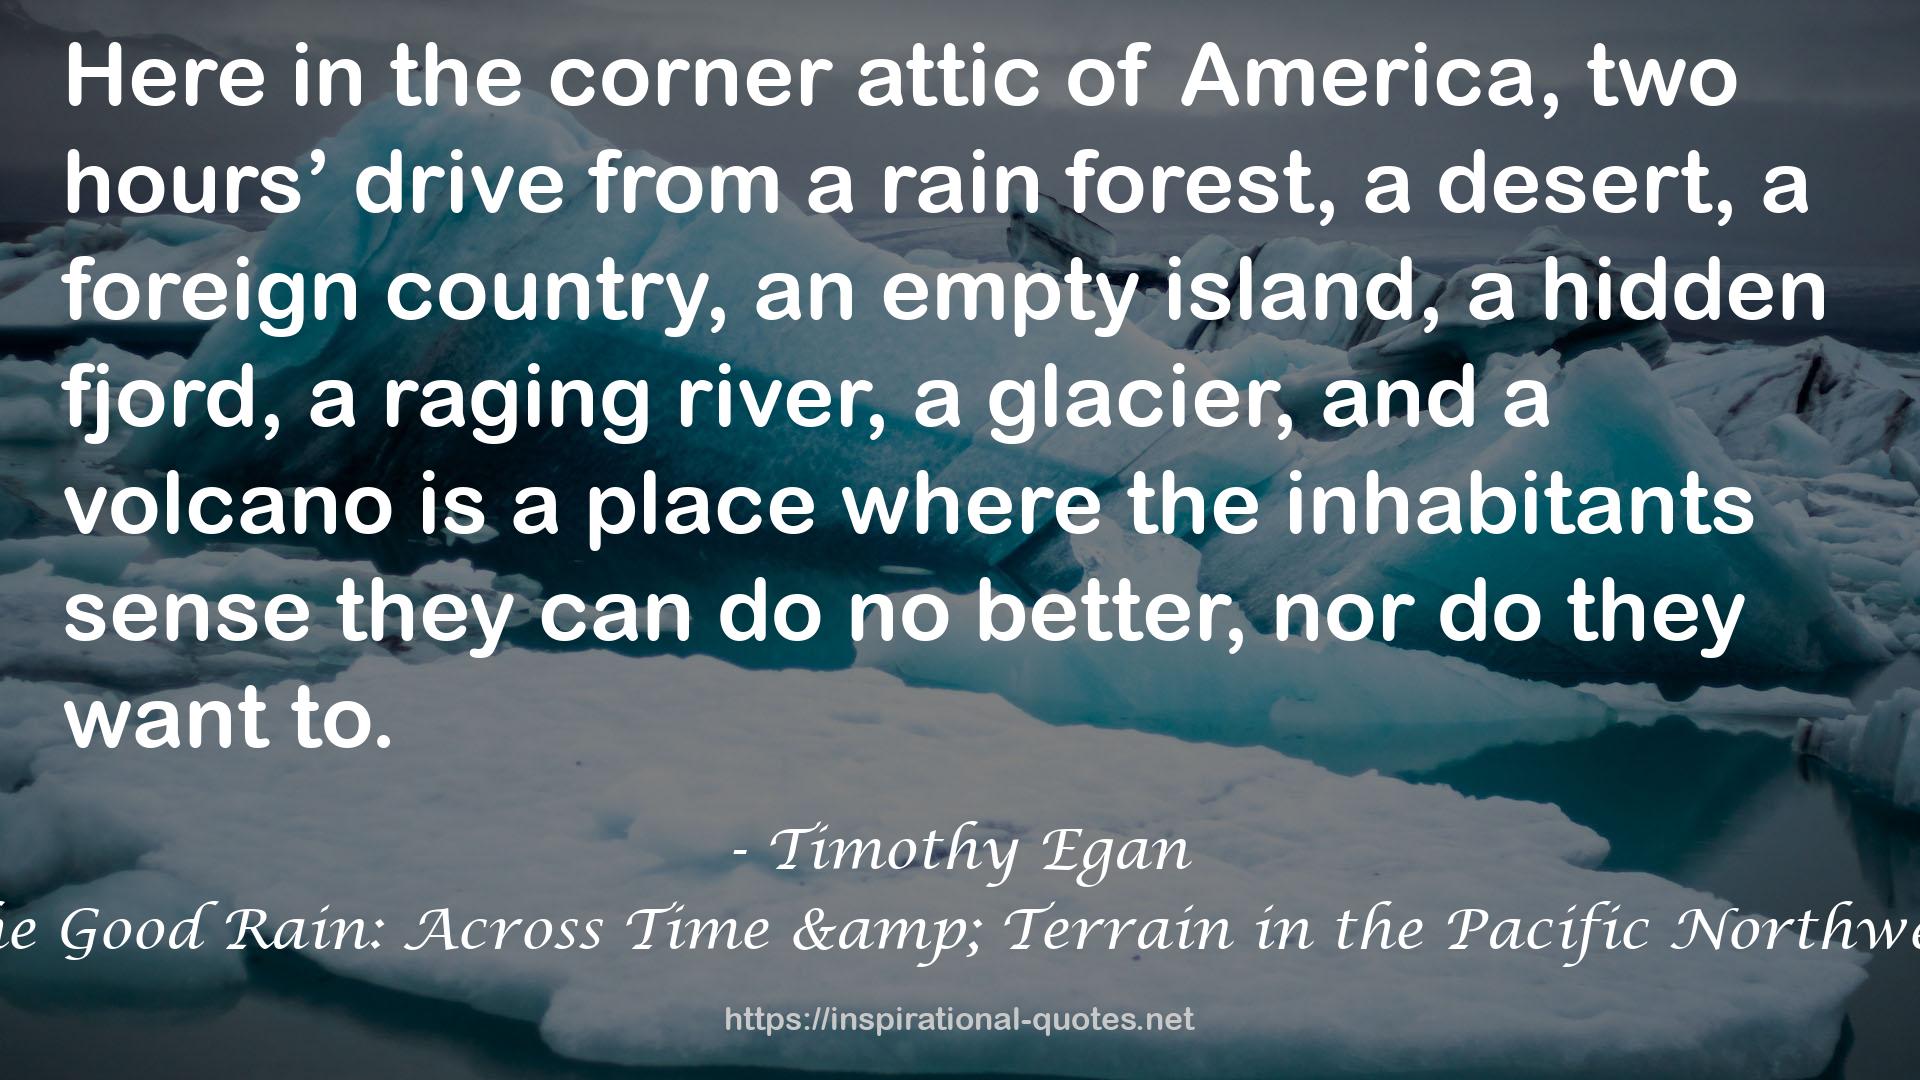 The Good Rain: Across Time & Terrain in the Pacific Northwest QUOTES